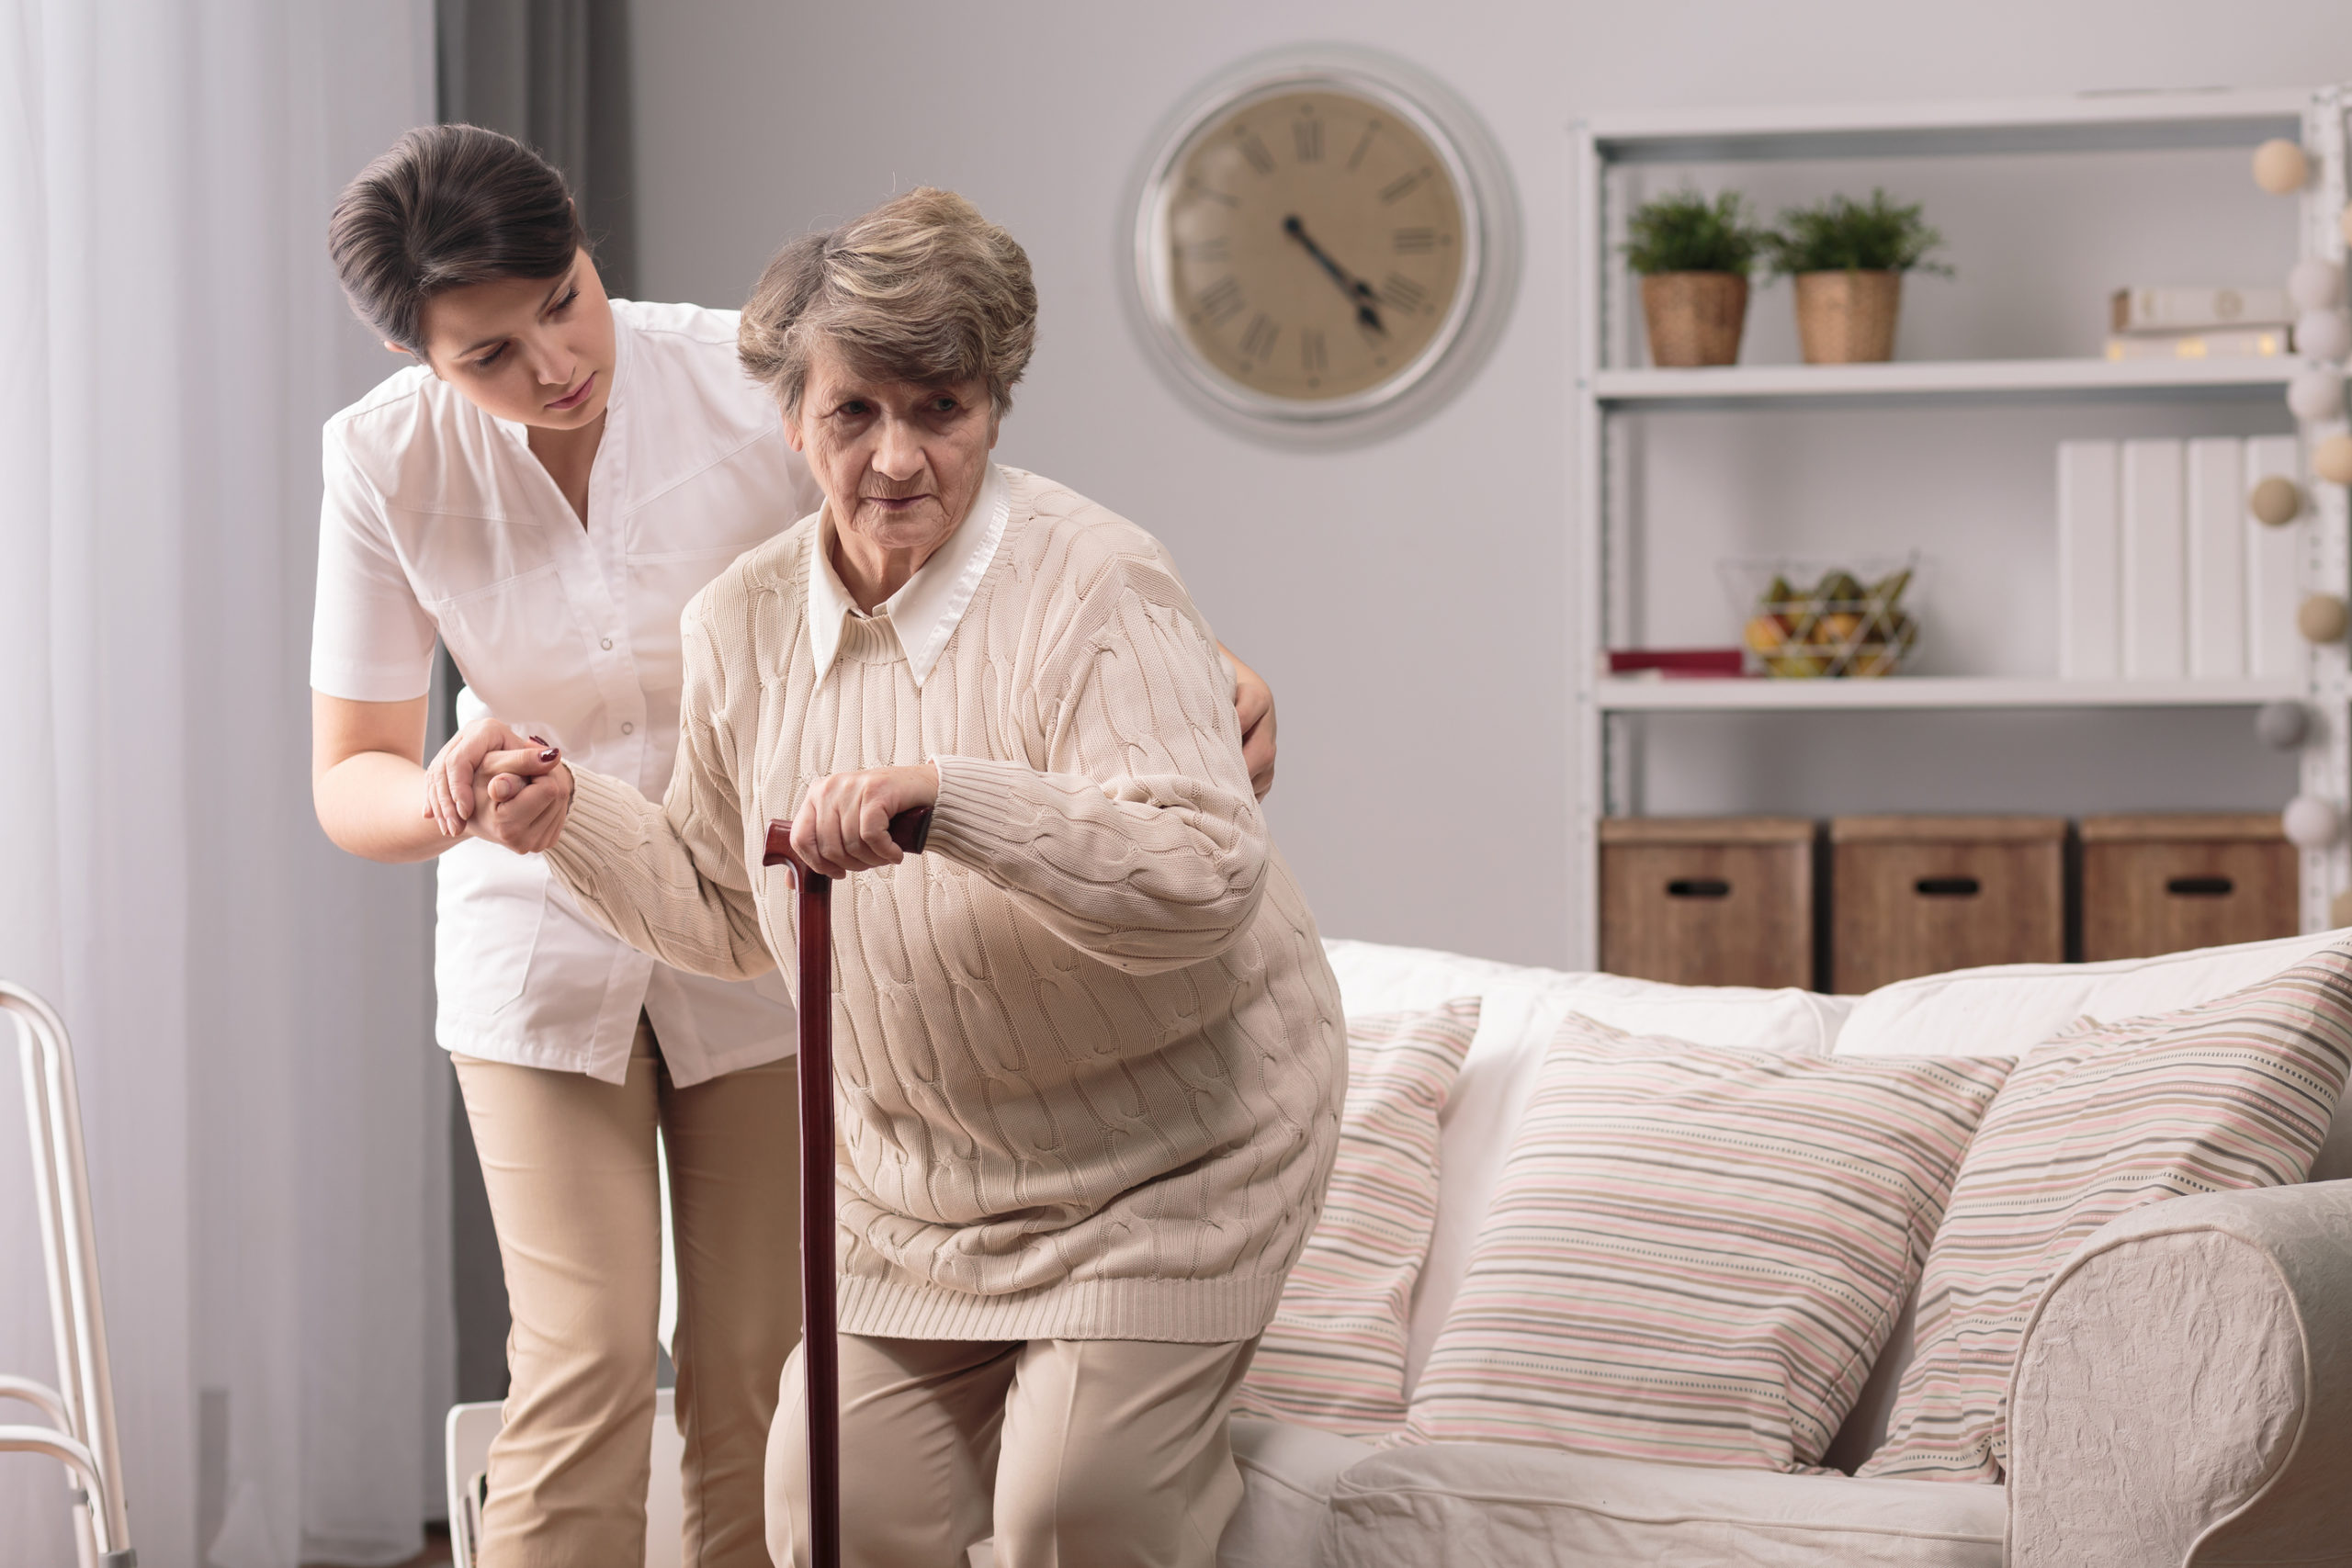 Elderly woman being assisted by caregiver in home